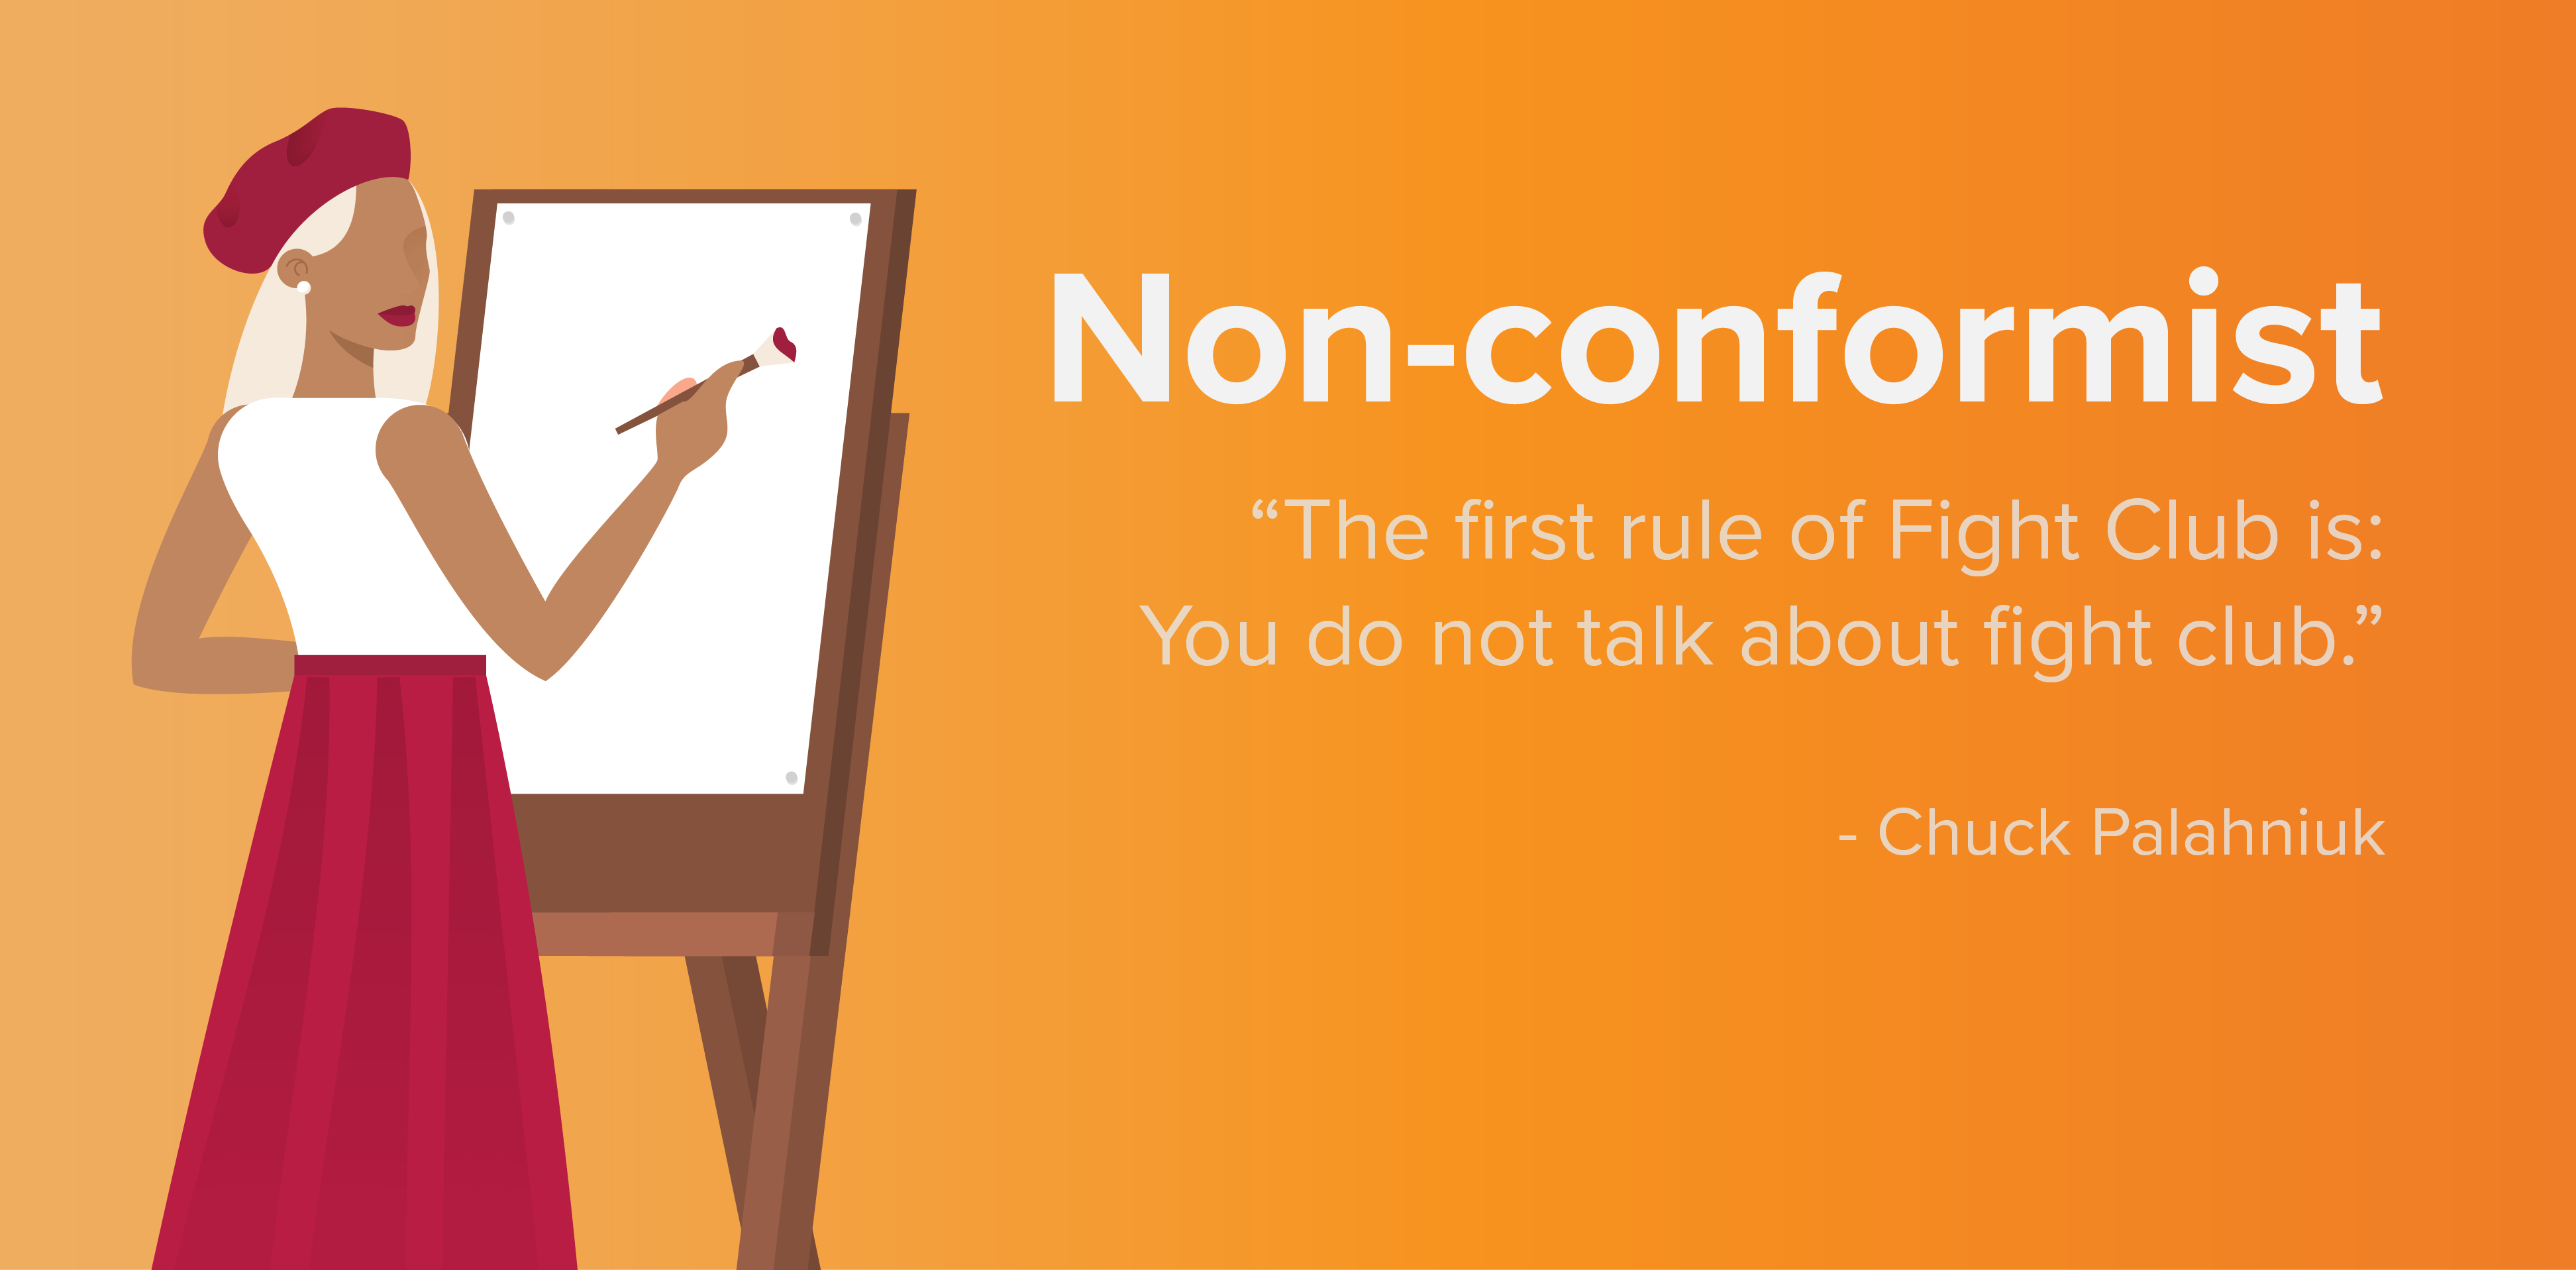 Non-conformist. "The first rule of Fight Club is: You do not talk about fight club." -Chuck Palahniuk